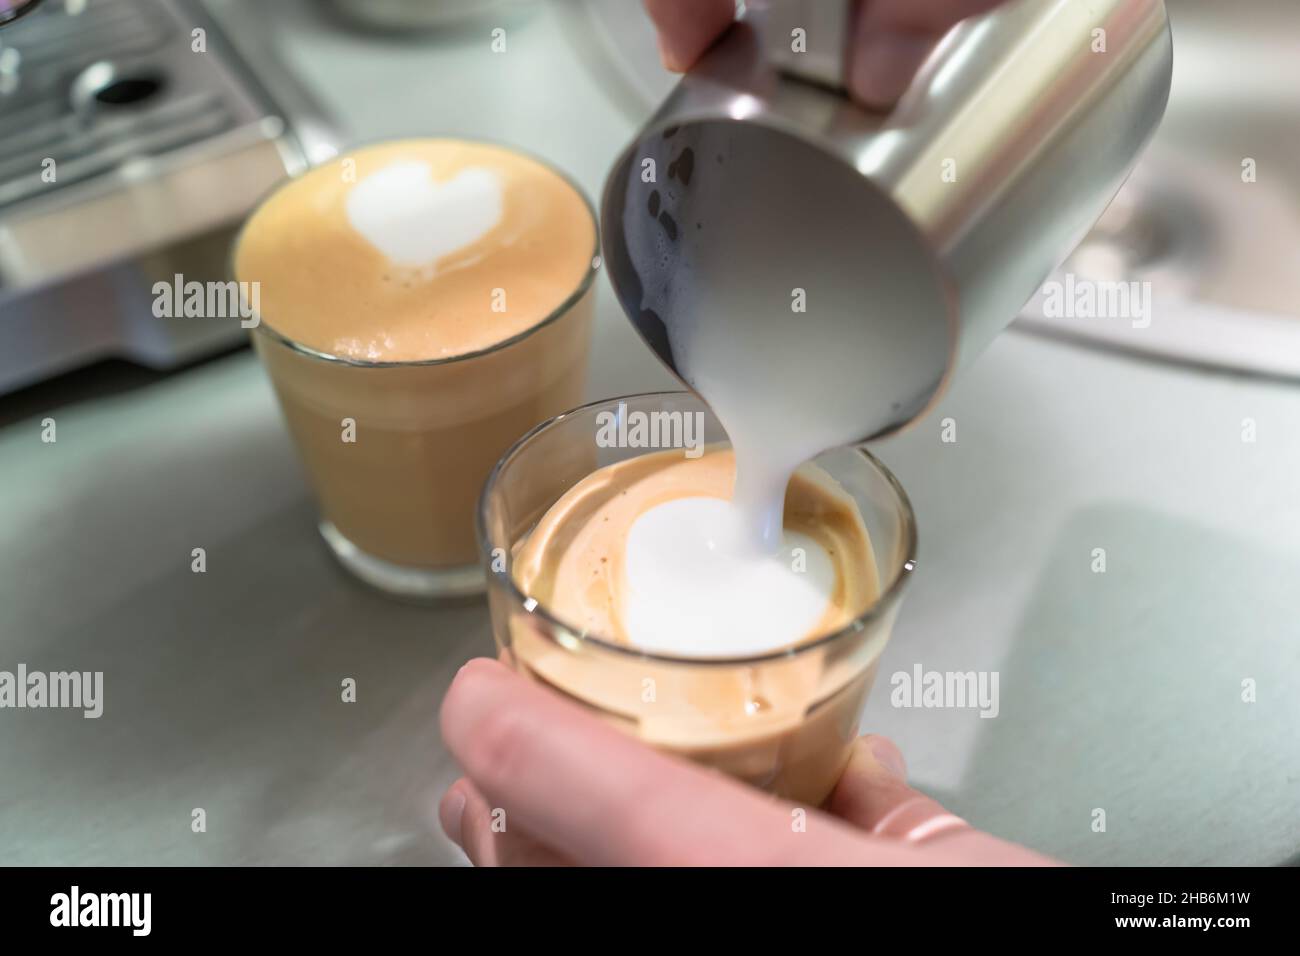 A man cooks cappuccino at home, pours milk from the pitcher into a glass. Stock Photo